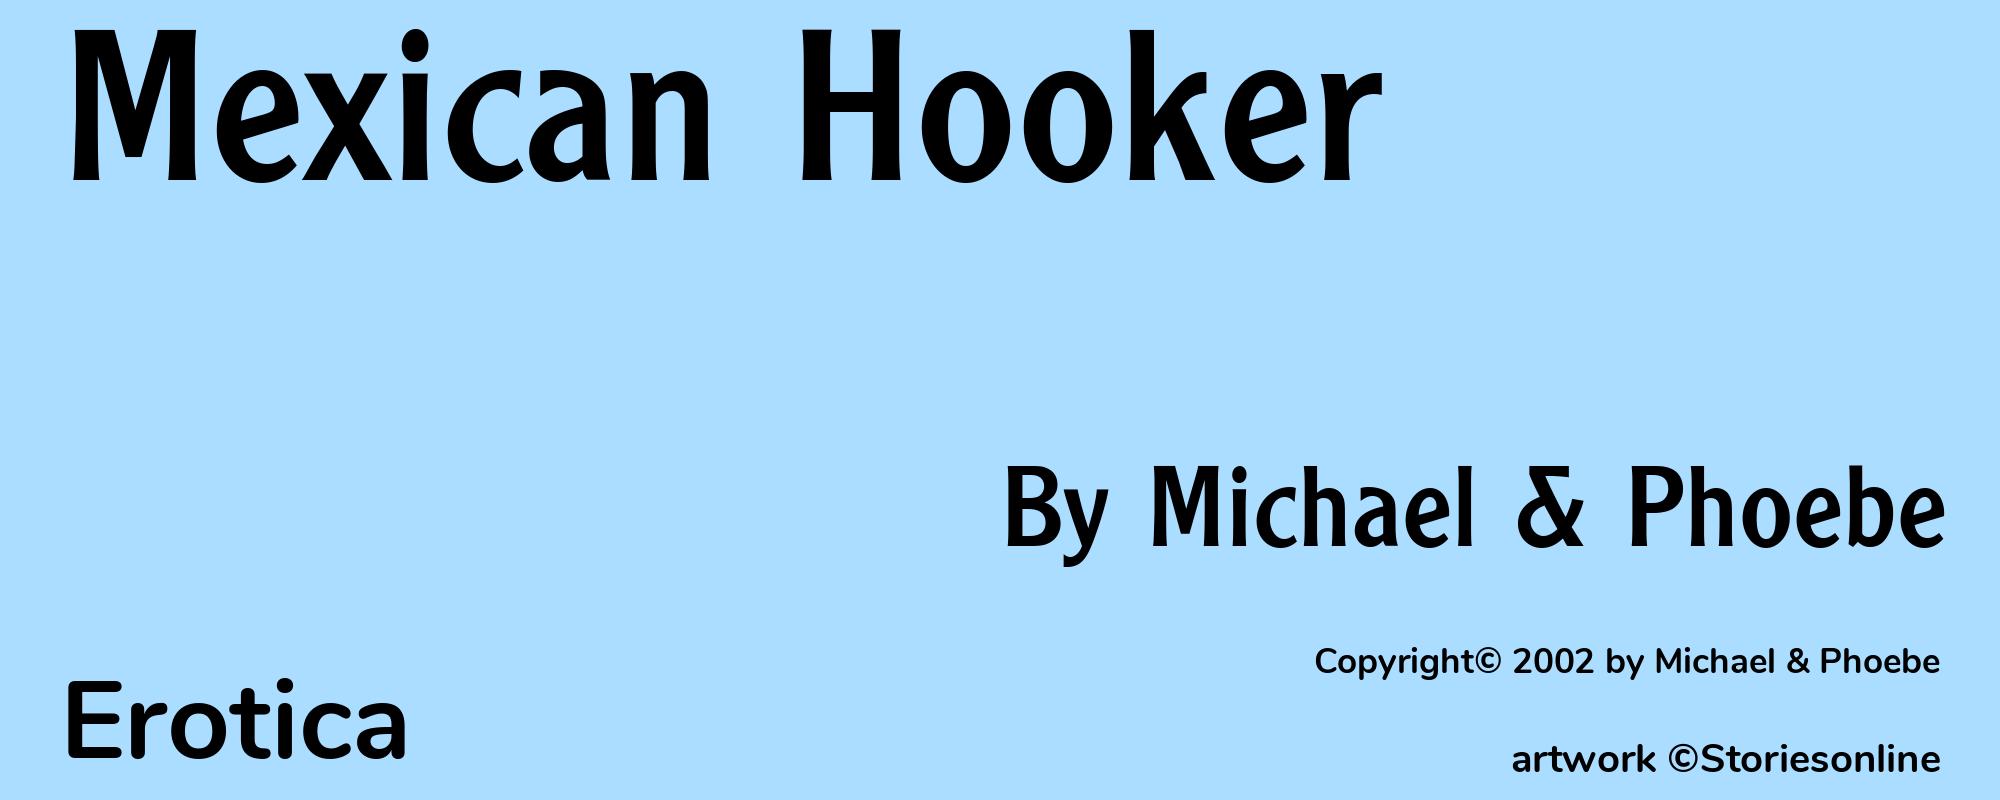 Mexican Hooker - Cover